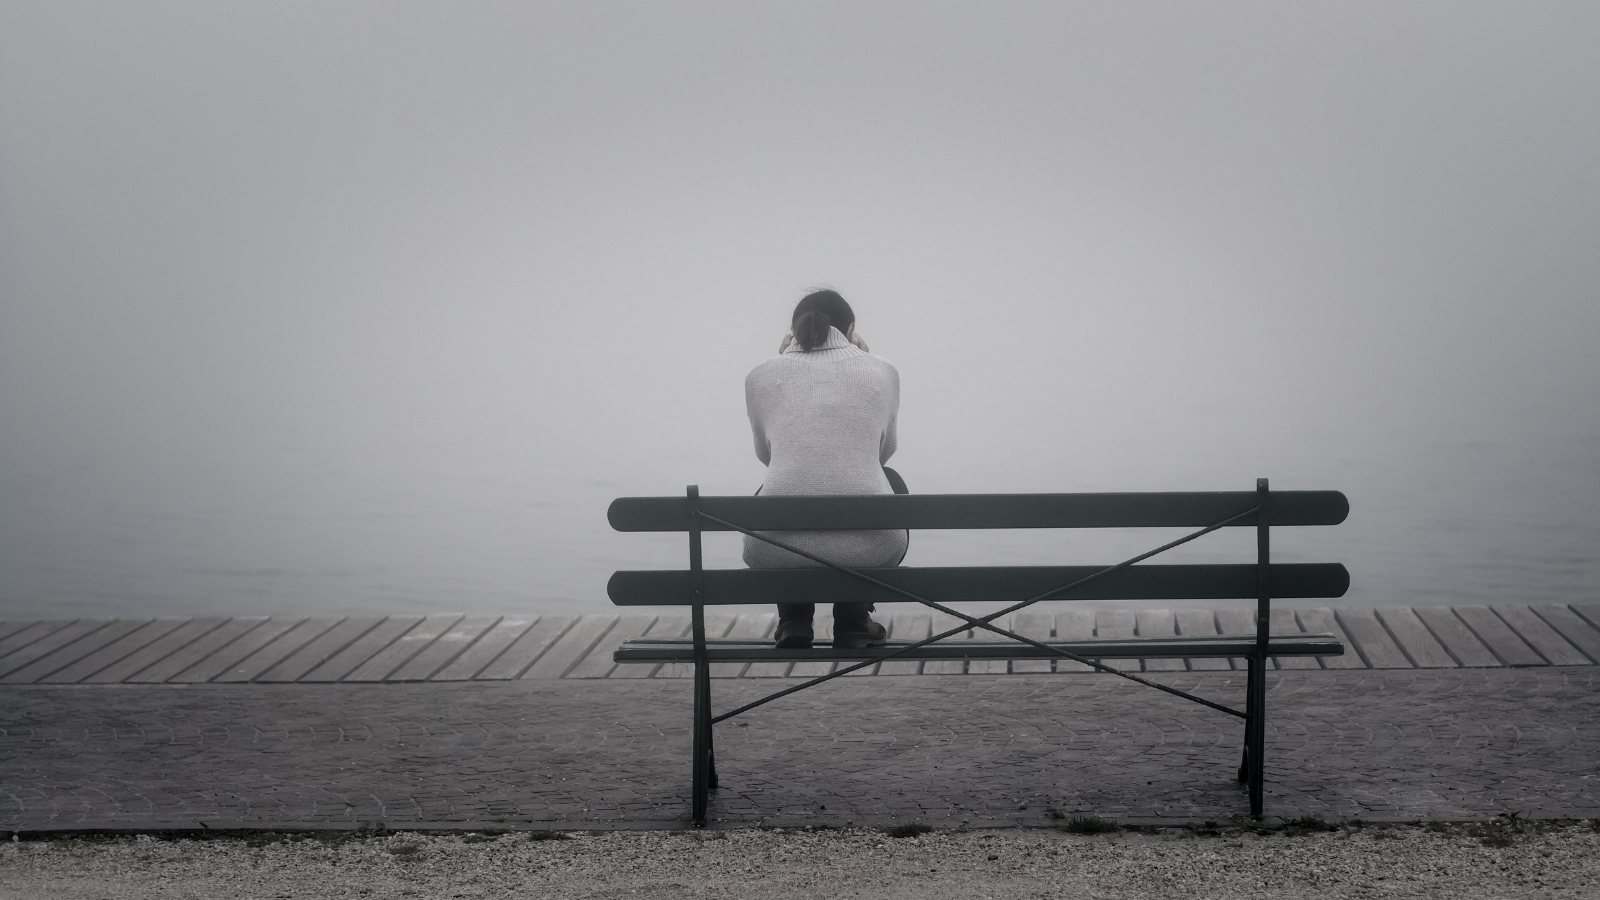 A woman sits on a bench alone